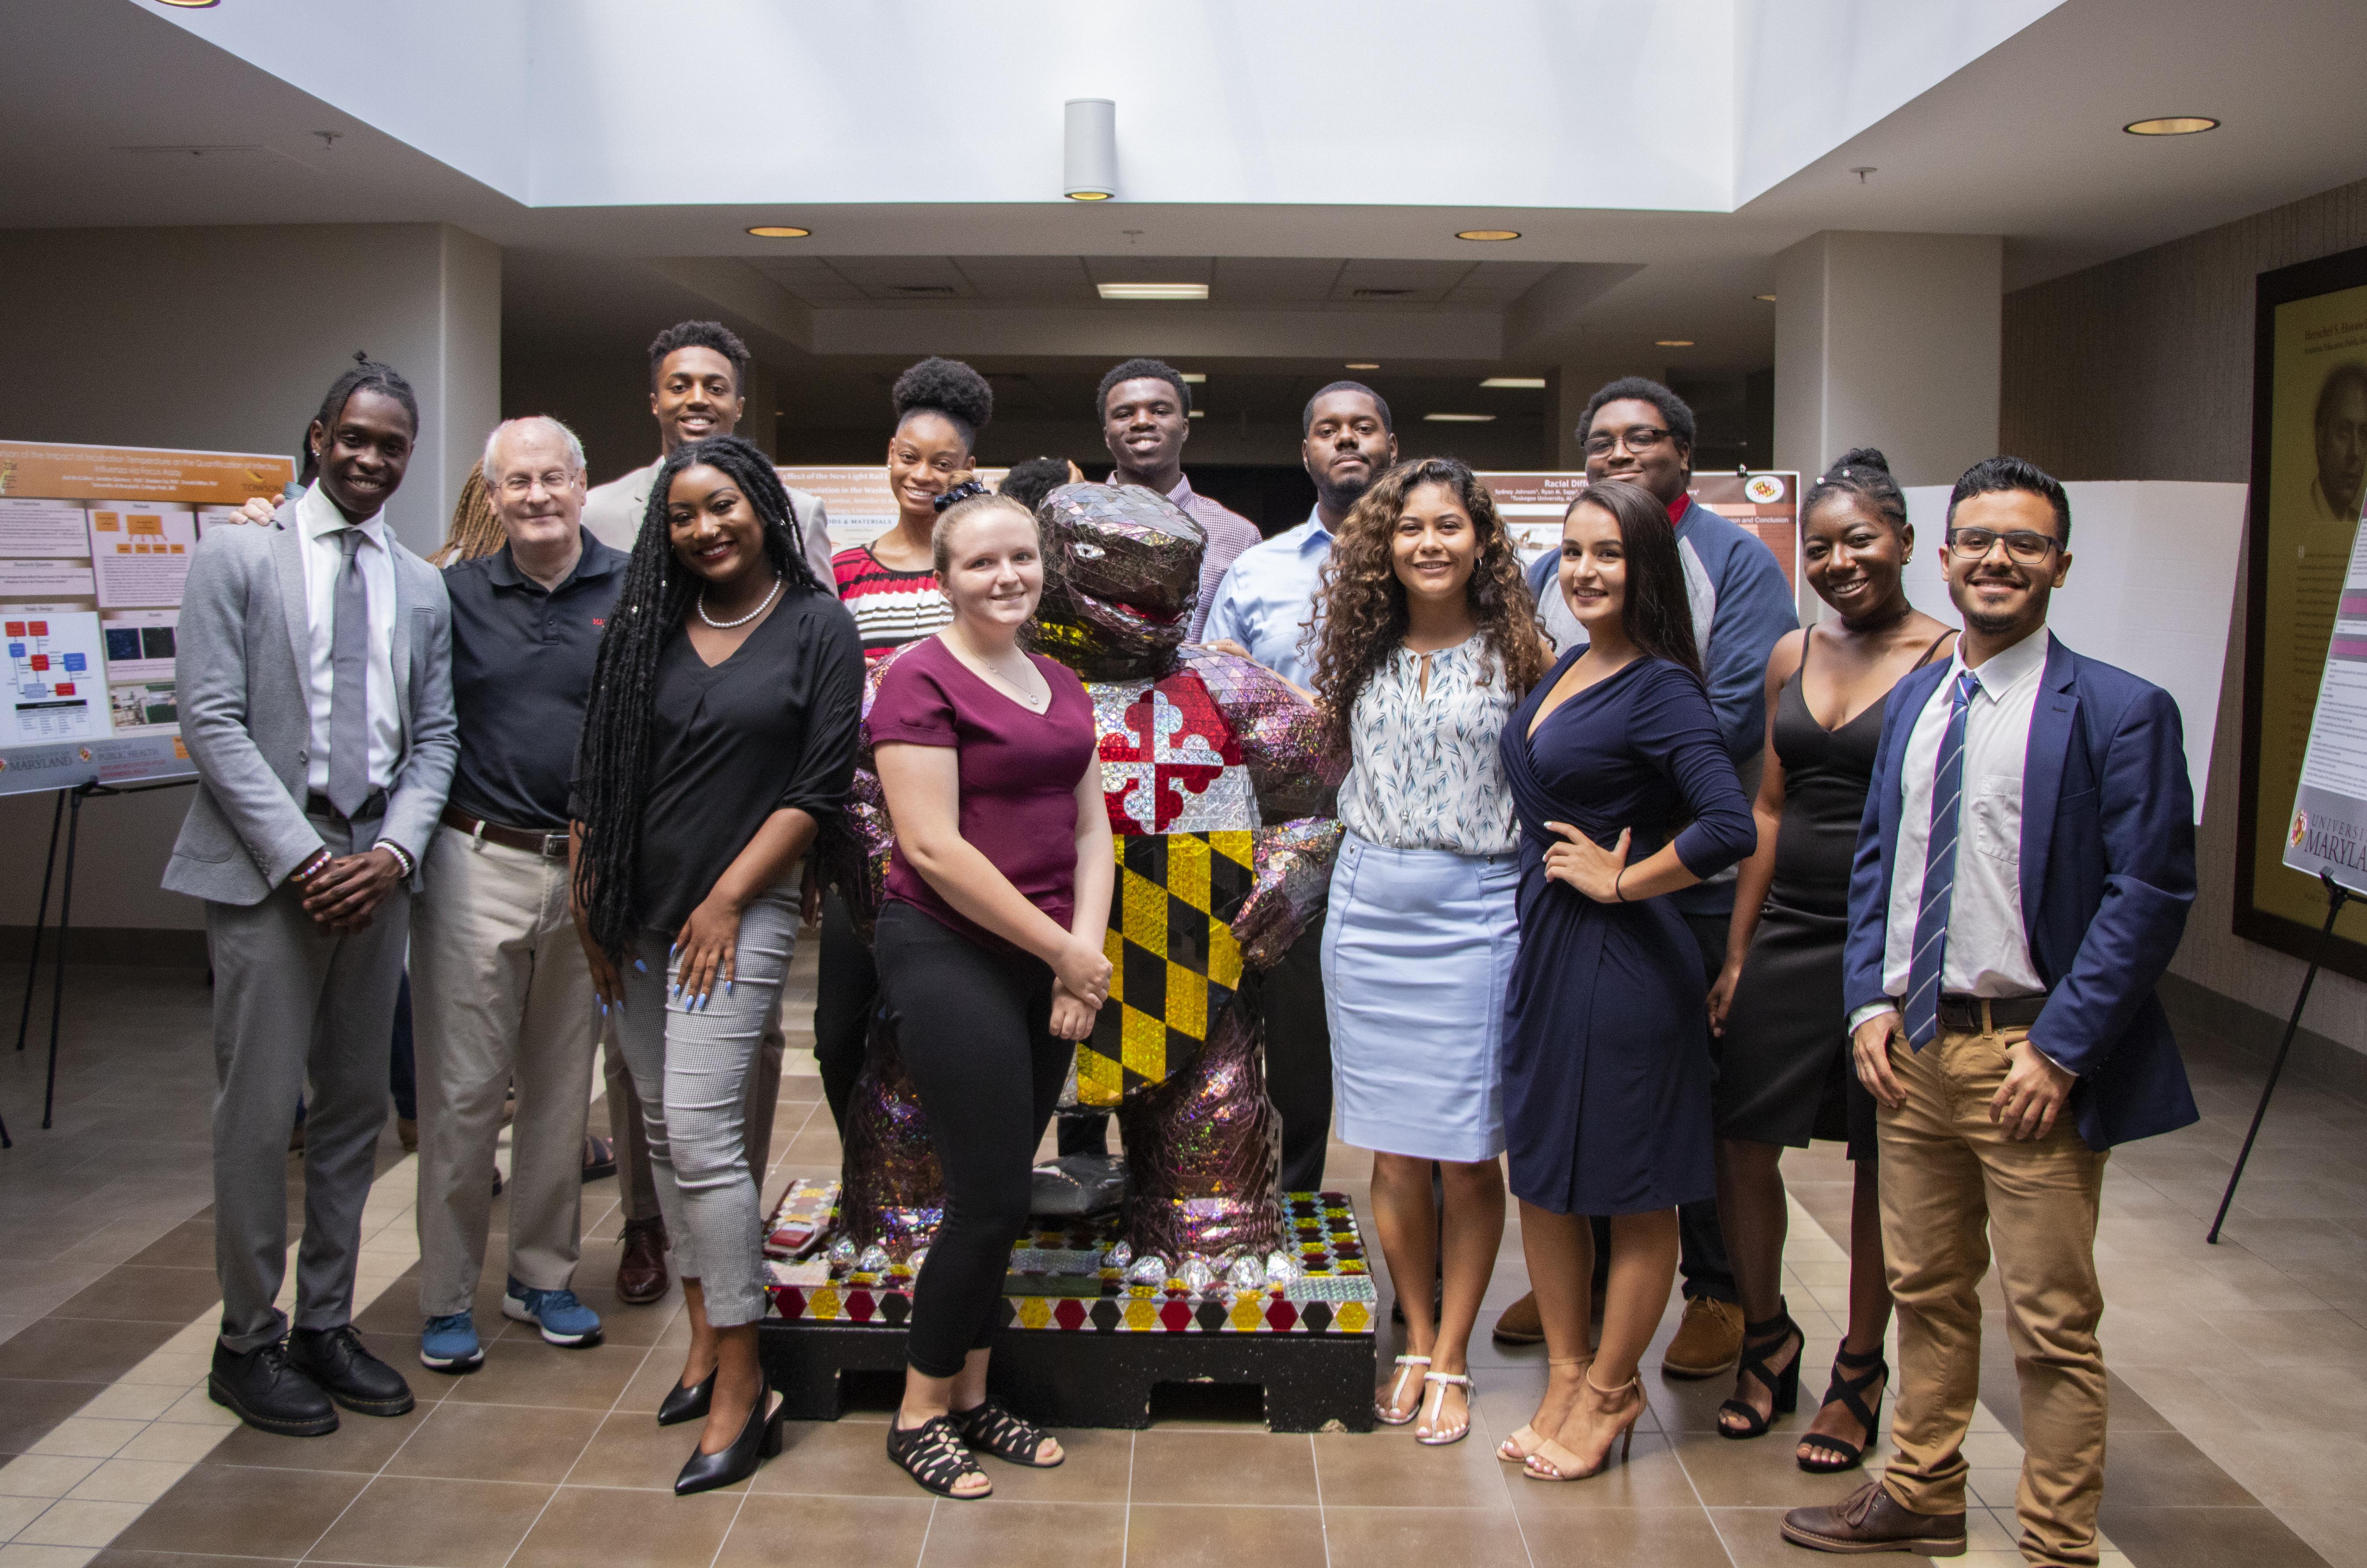 2019 STAR Cohort of the School of Public Health at the University of Maryland